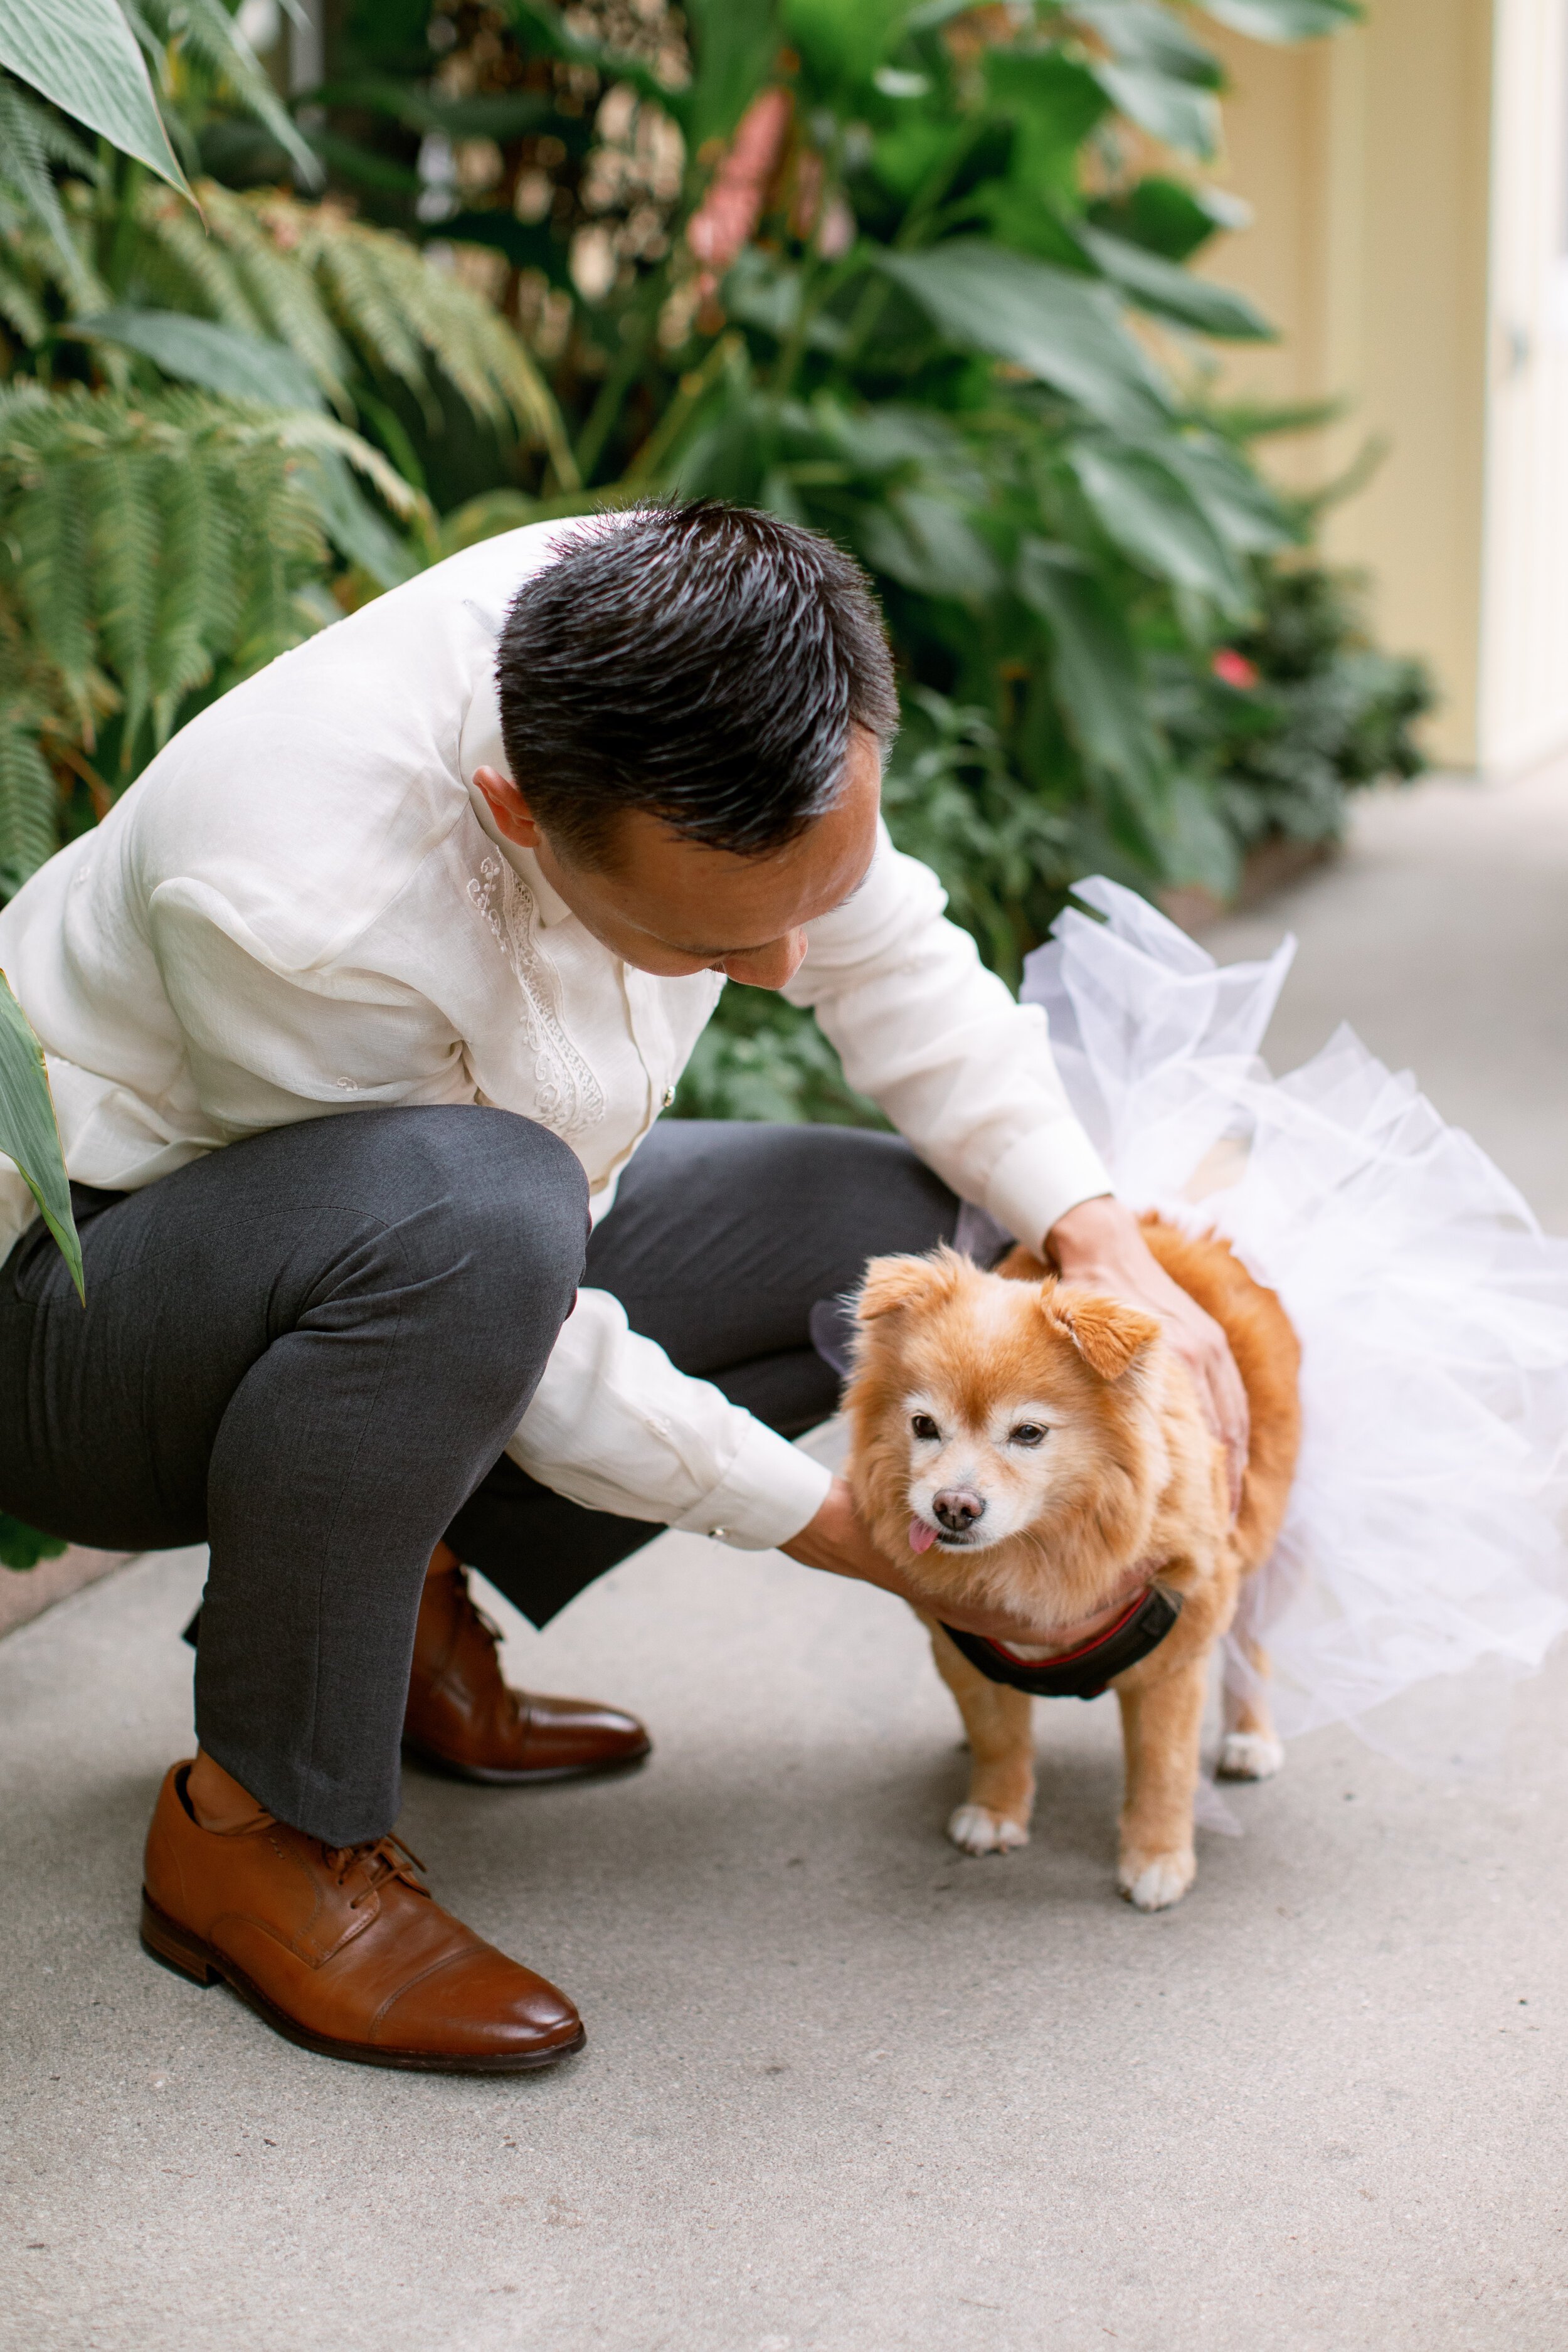 www.santabarbarawedding.com | Events by Fran | Anna Delores Photography | Small Dog in Tutu